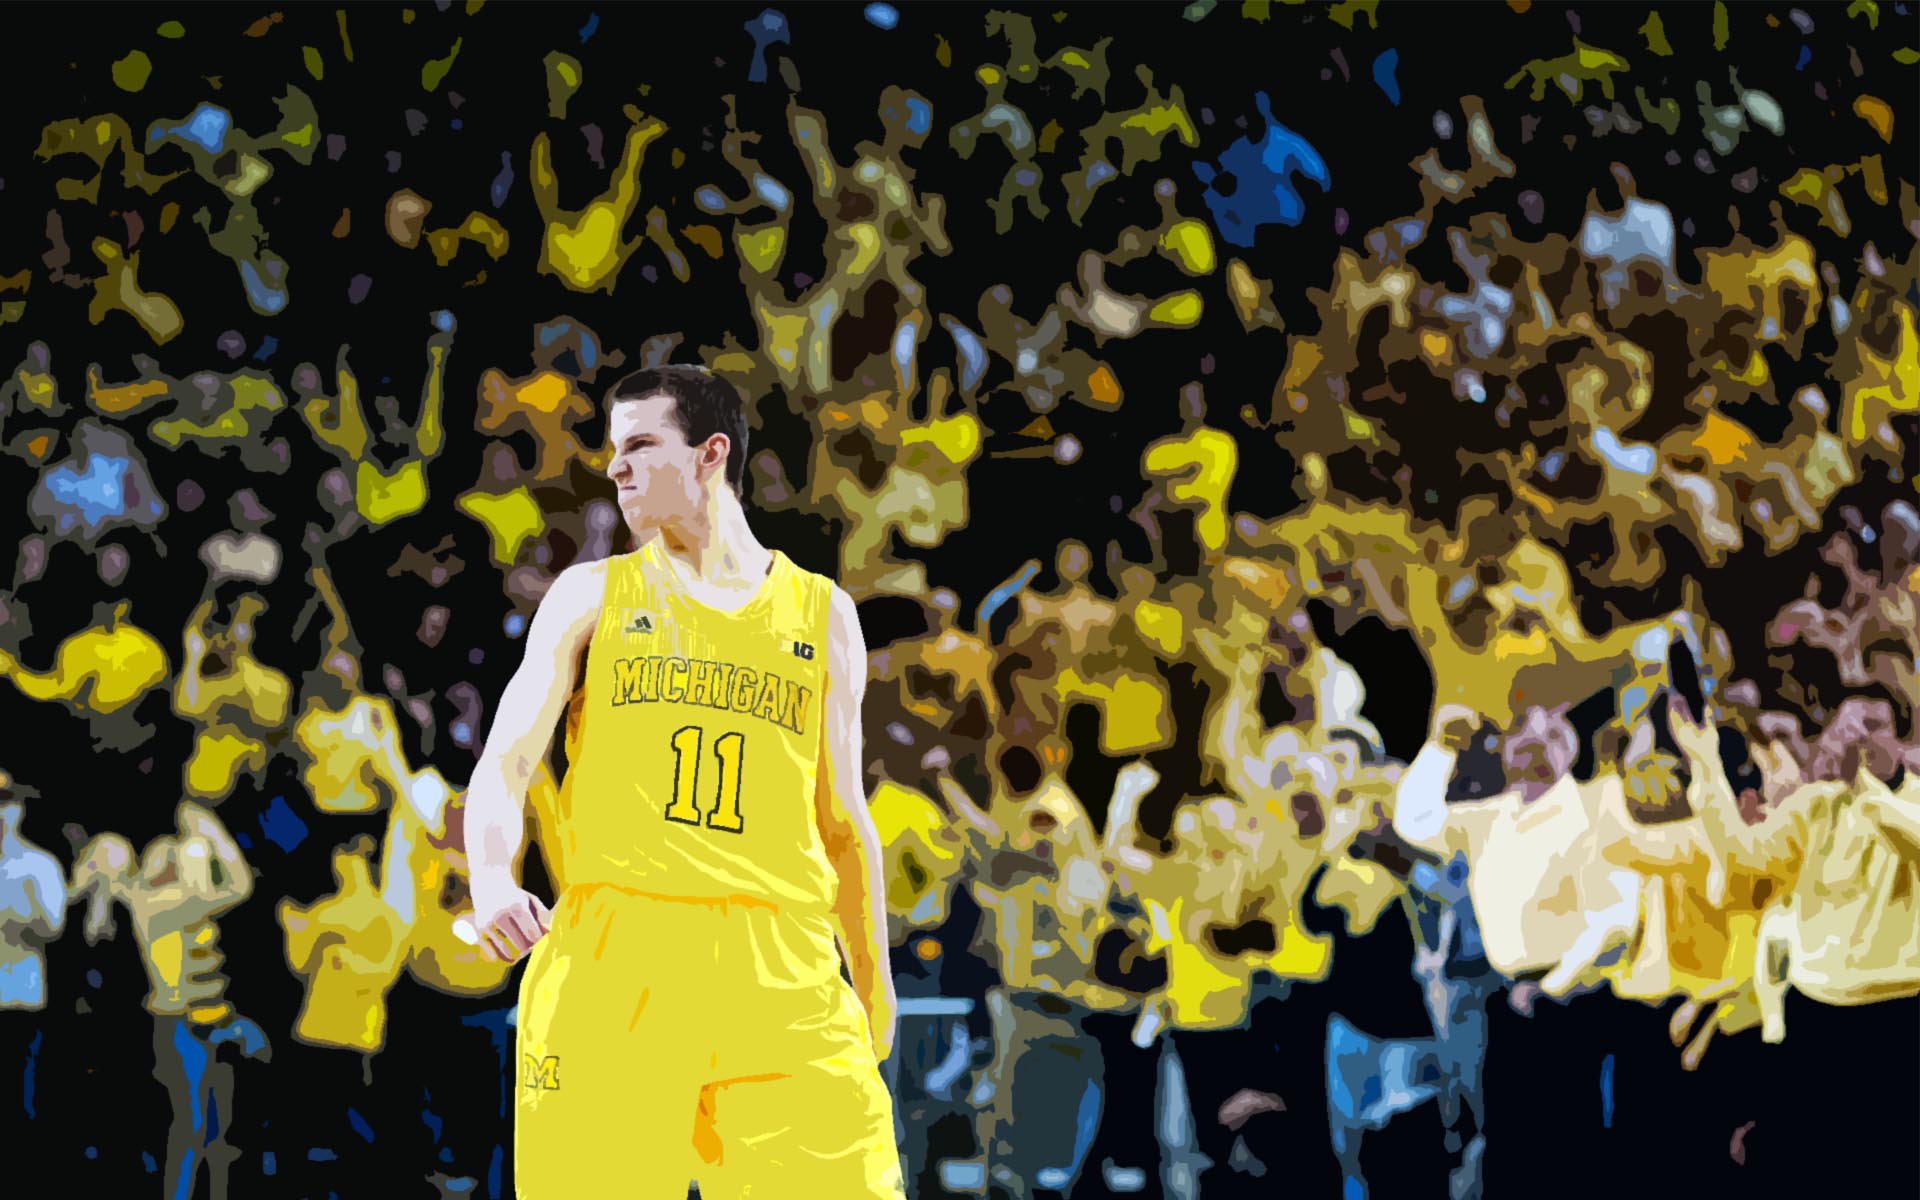 Michigan Basketball Wallpaper Images Pictures   Becuo